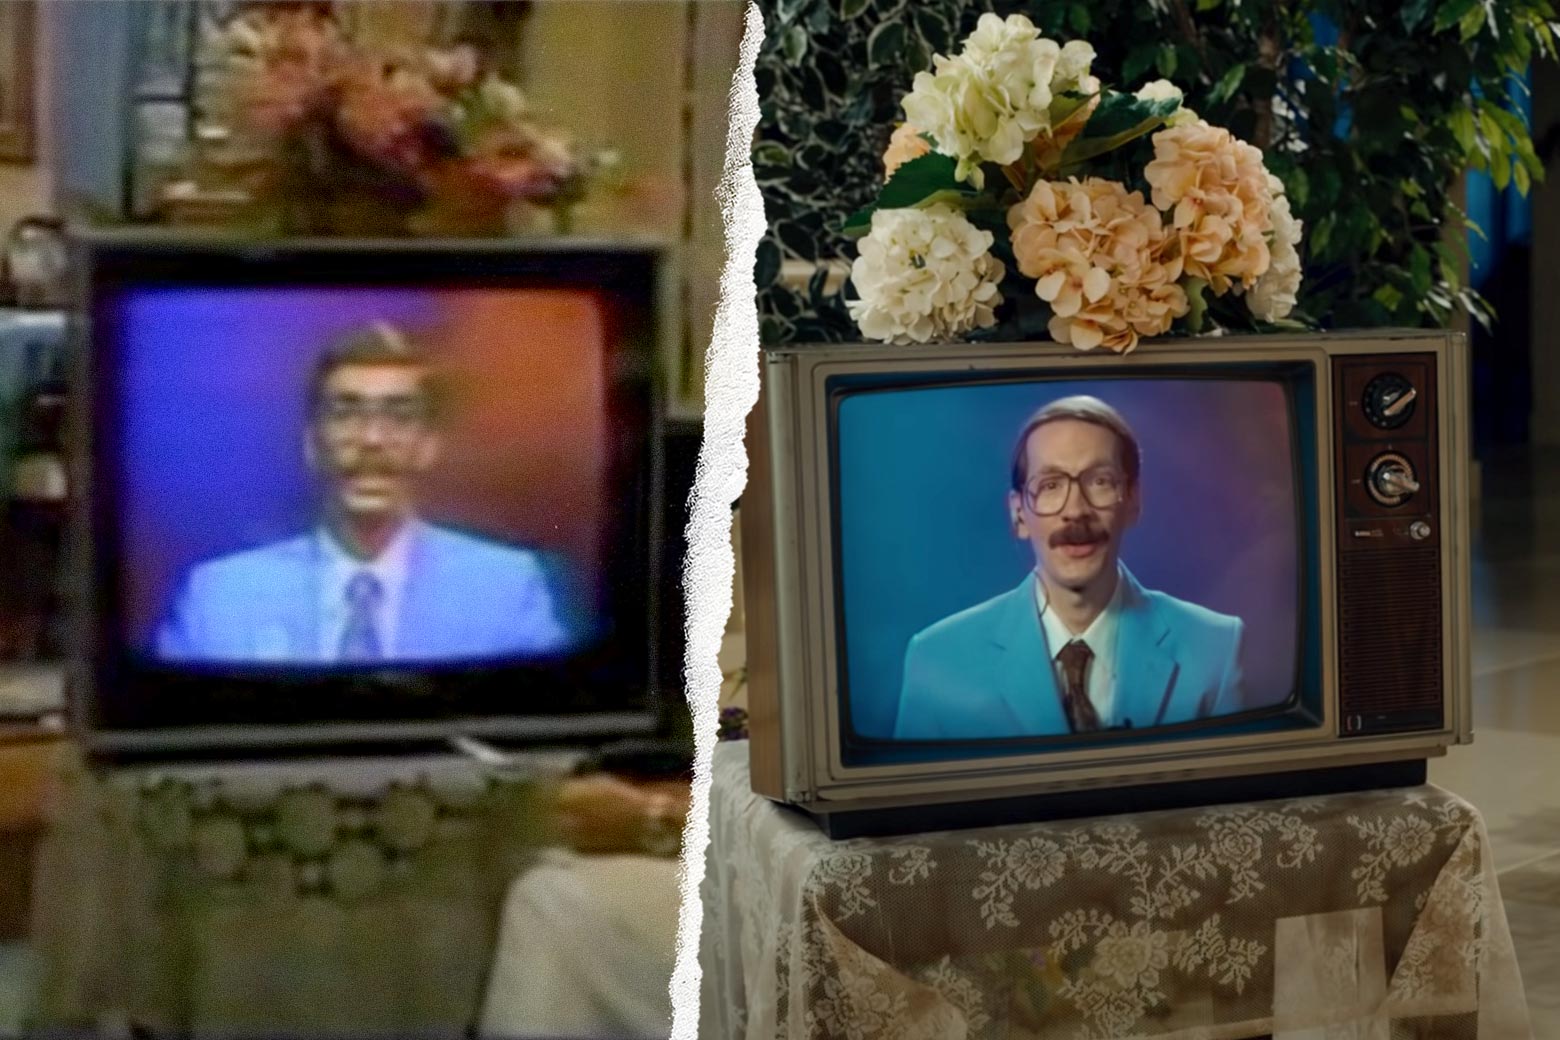 Two TV screens showing men in blue suits talking straight to the camera.